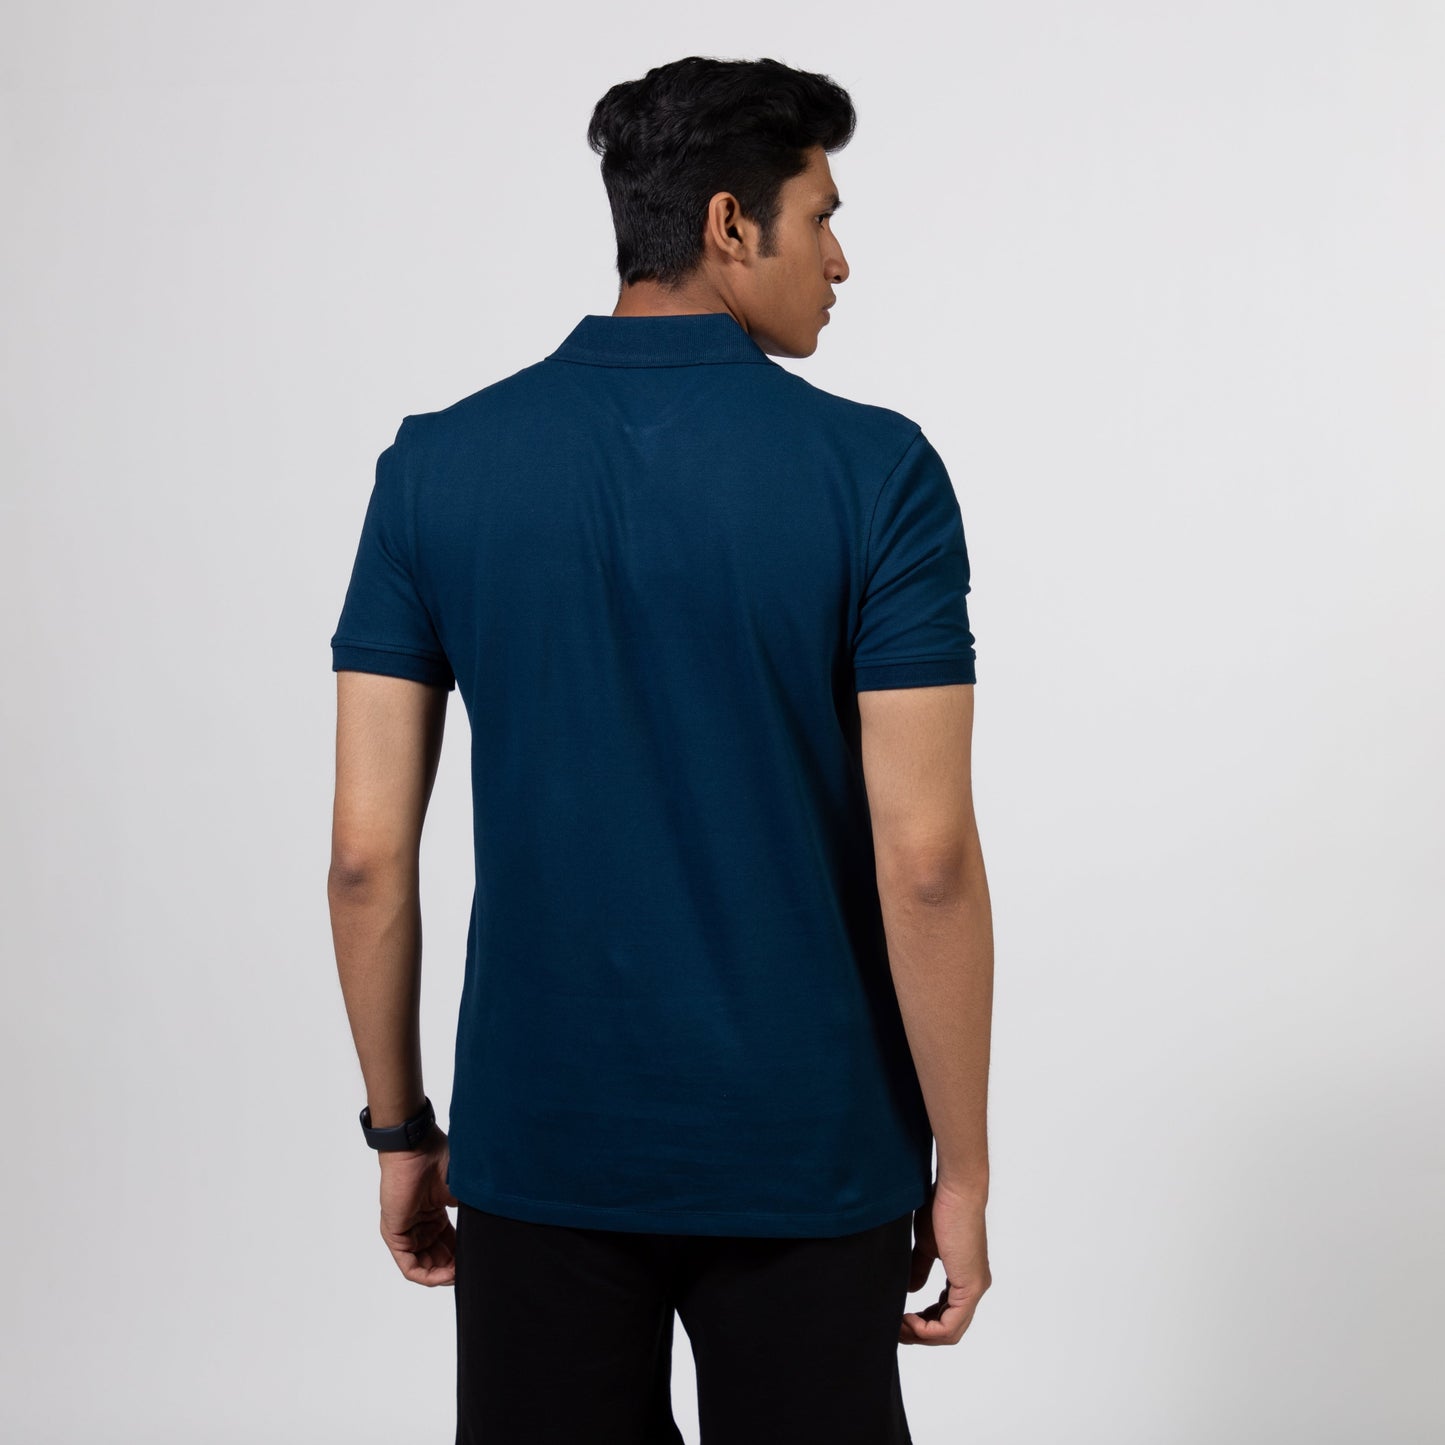 Ribbed Collar Knit Polo T-Shirt: Blue